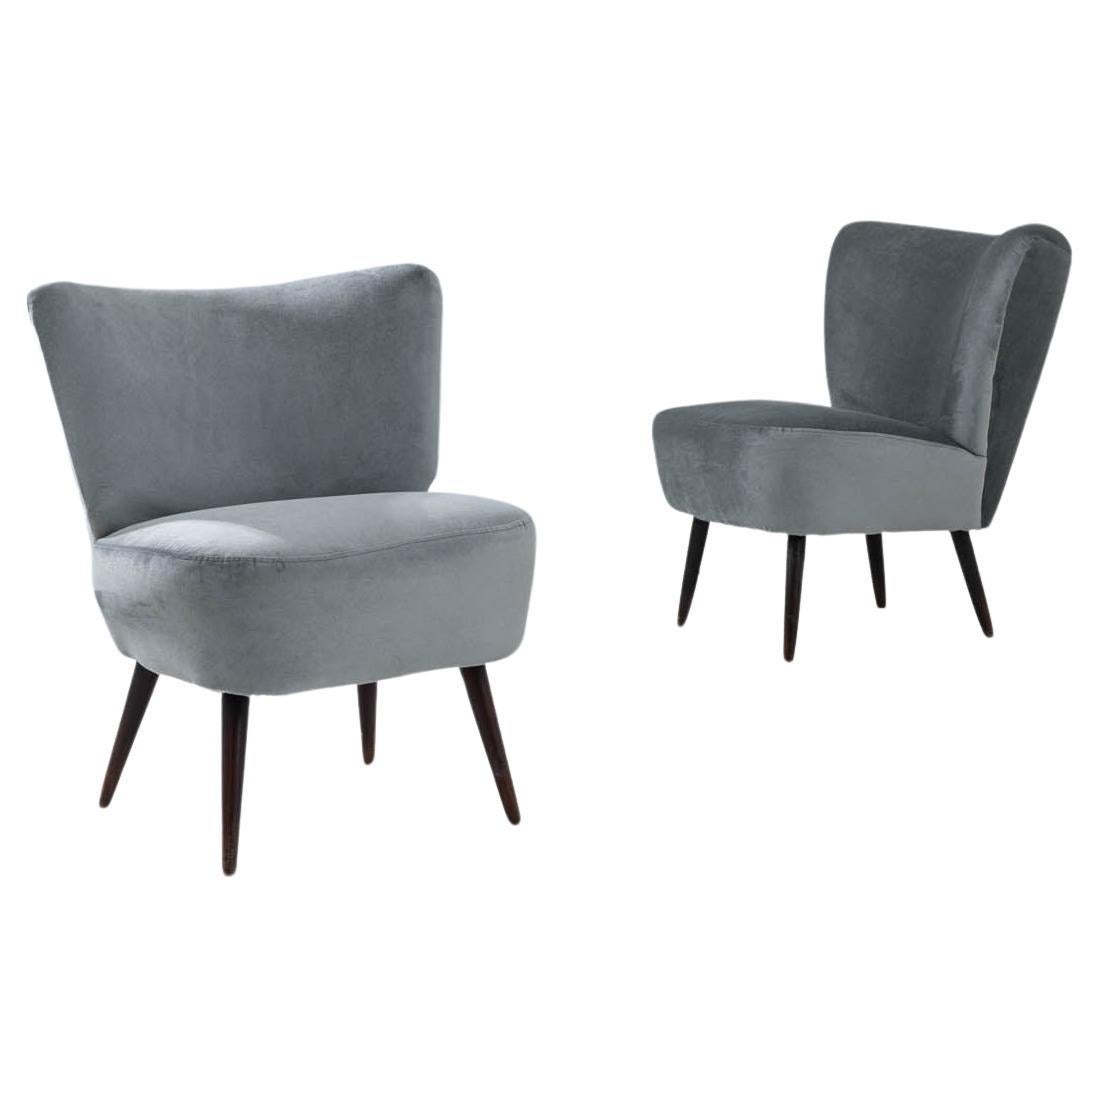 20th Century Danish Upholstered Armchairs, a Pair For Sale